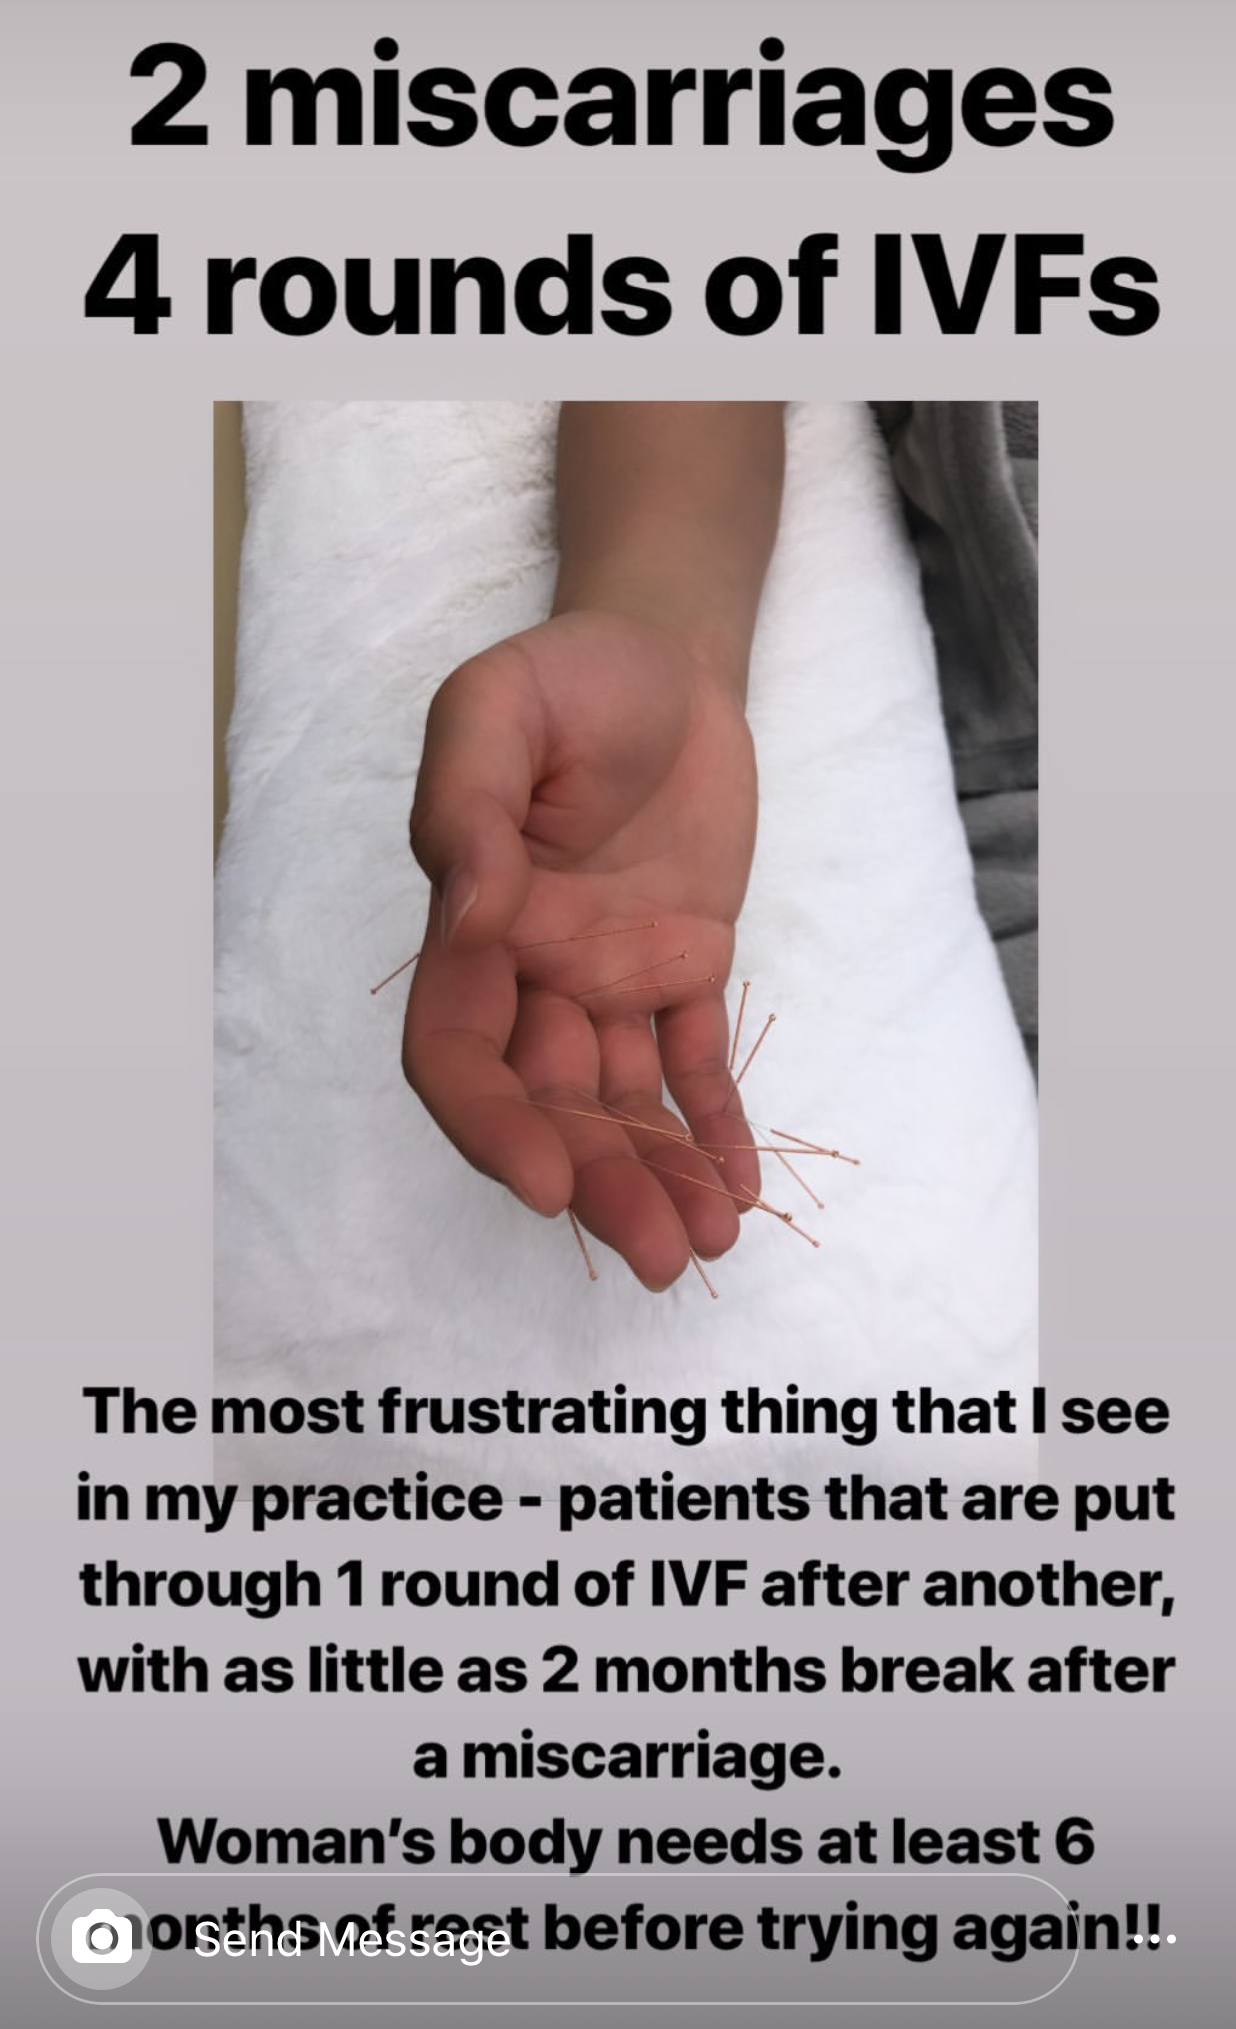  SuJok acupuncture treatments based in Vancouver used for fertility and reproductive health. Patient is treated for suffering from two miscarriages and undergoing four In Vitro Fertilization IVFs.  